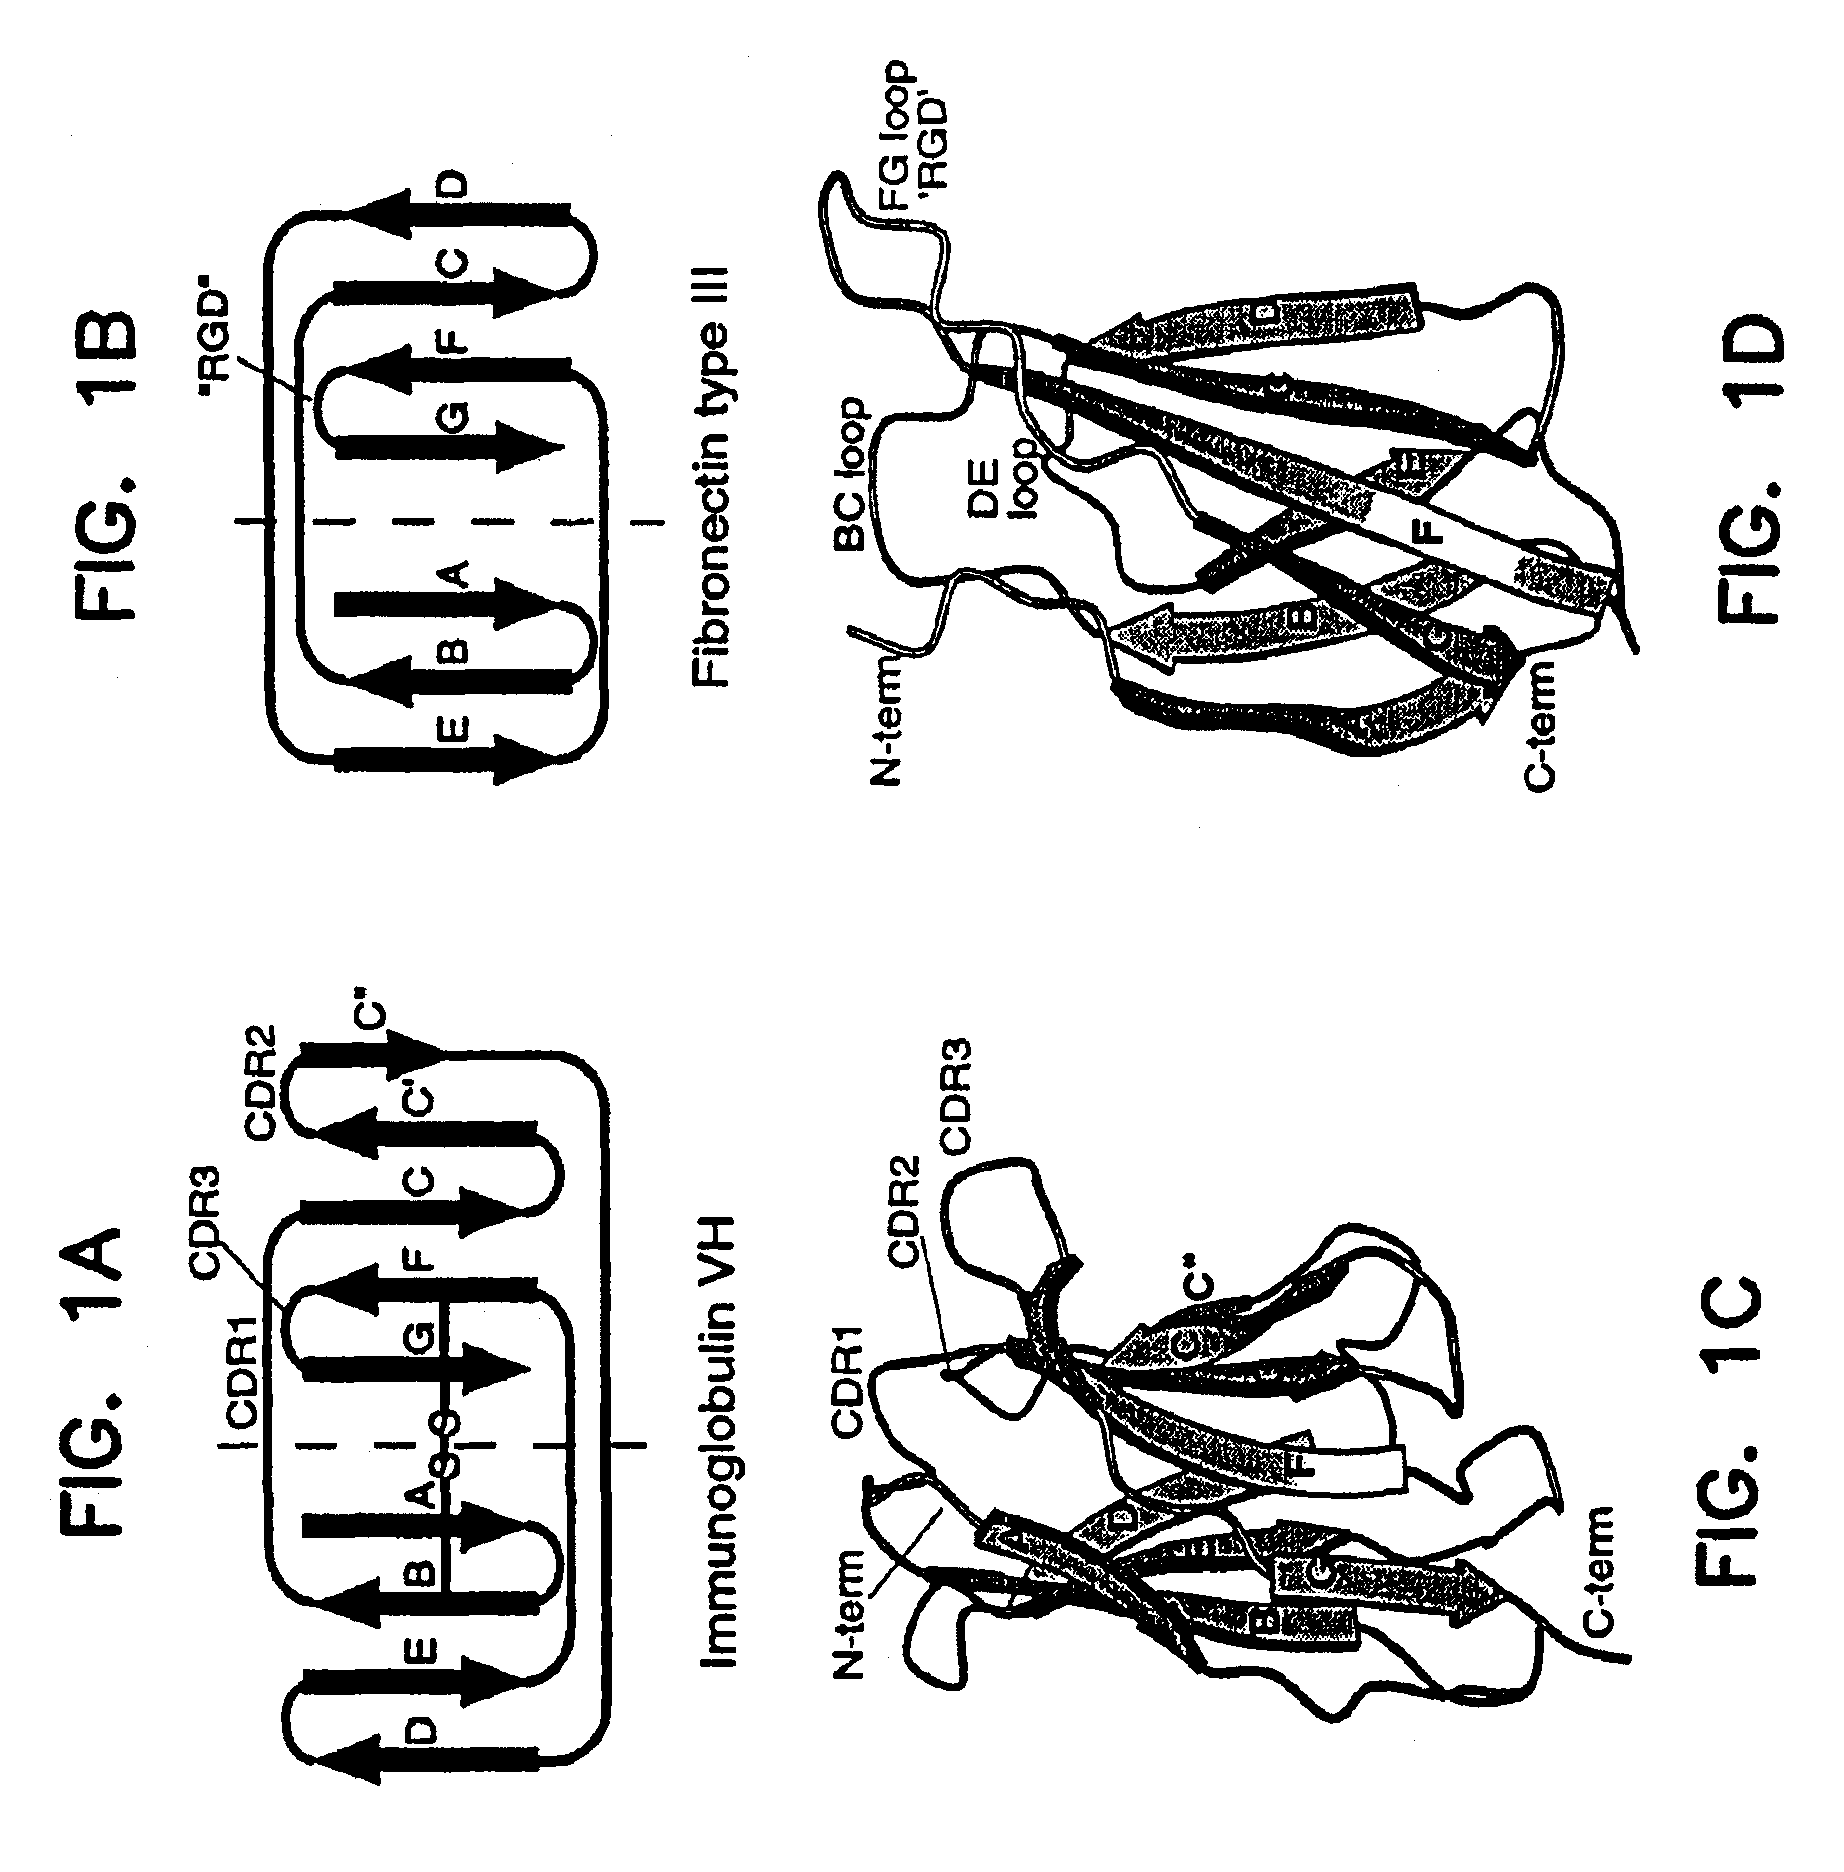 Reconstituted polypeptides